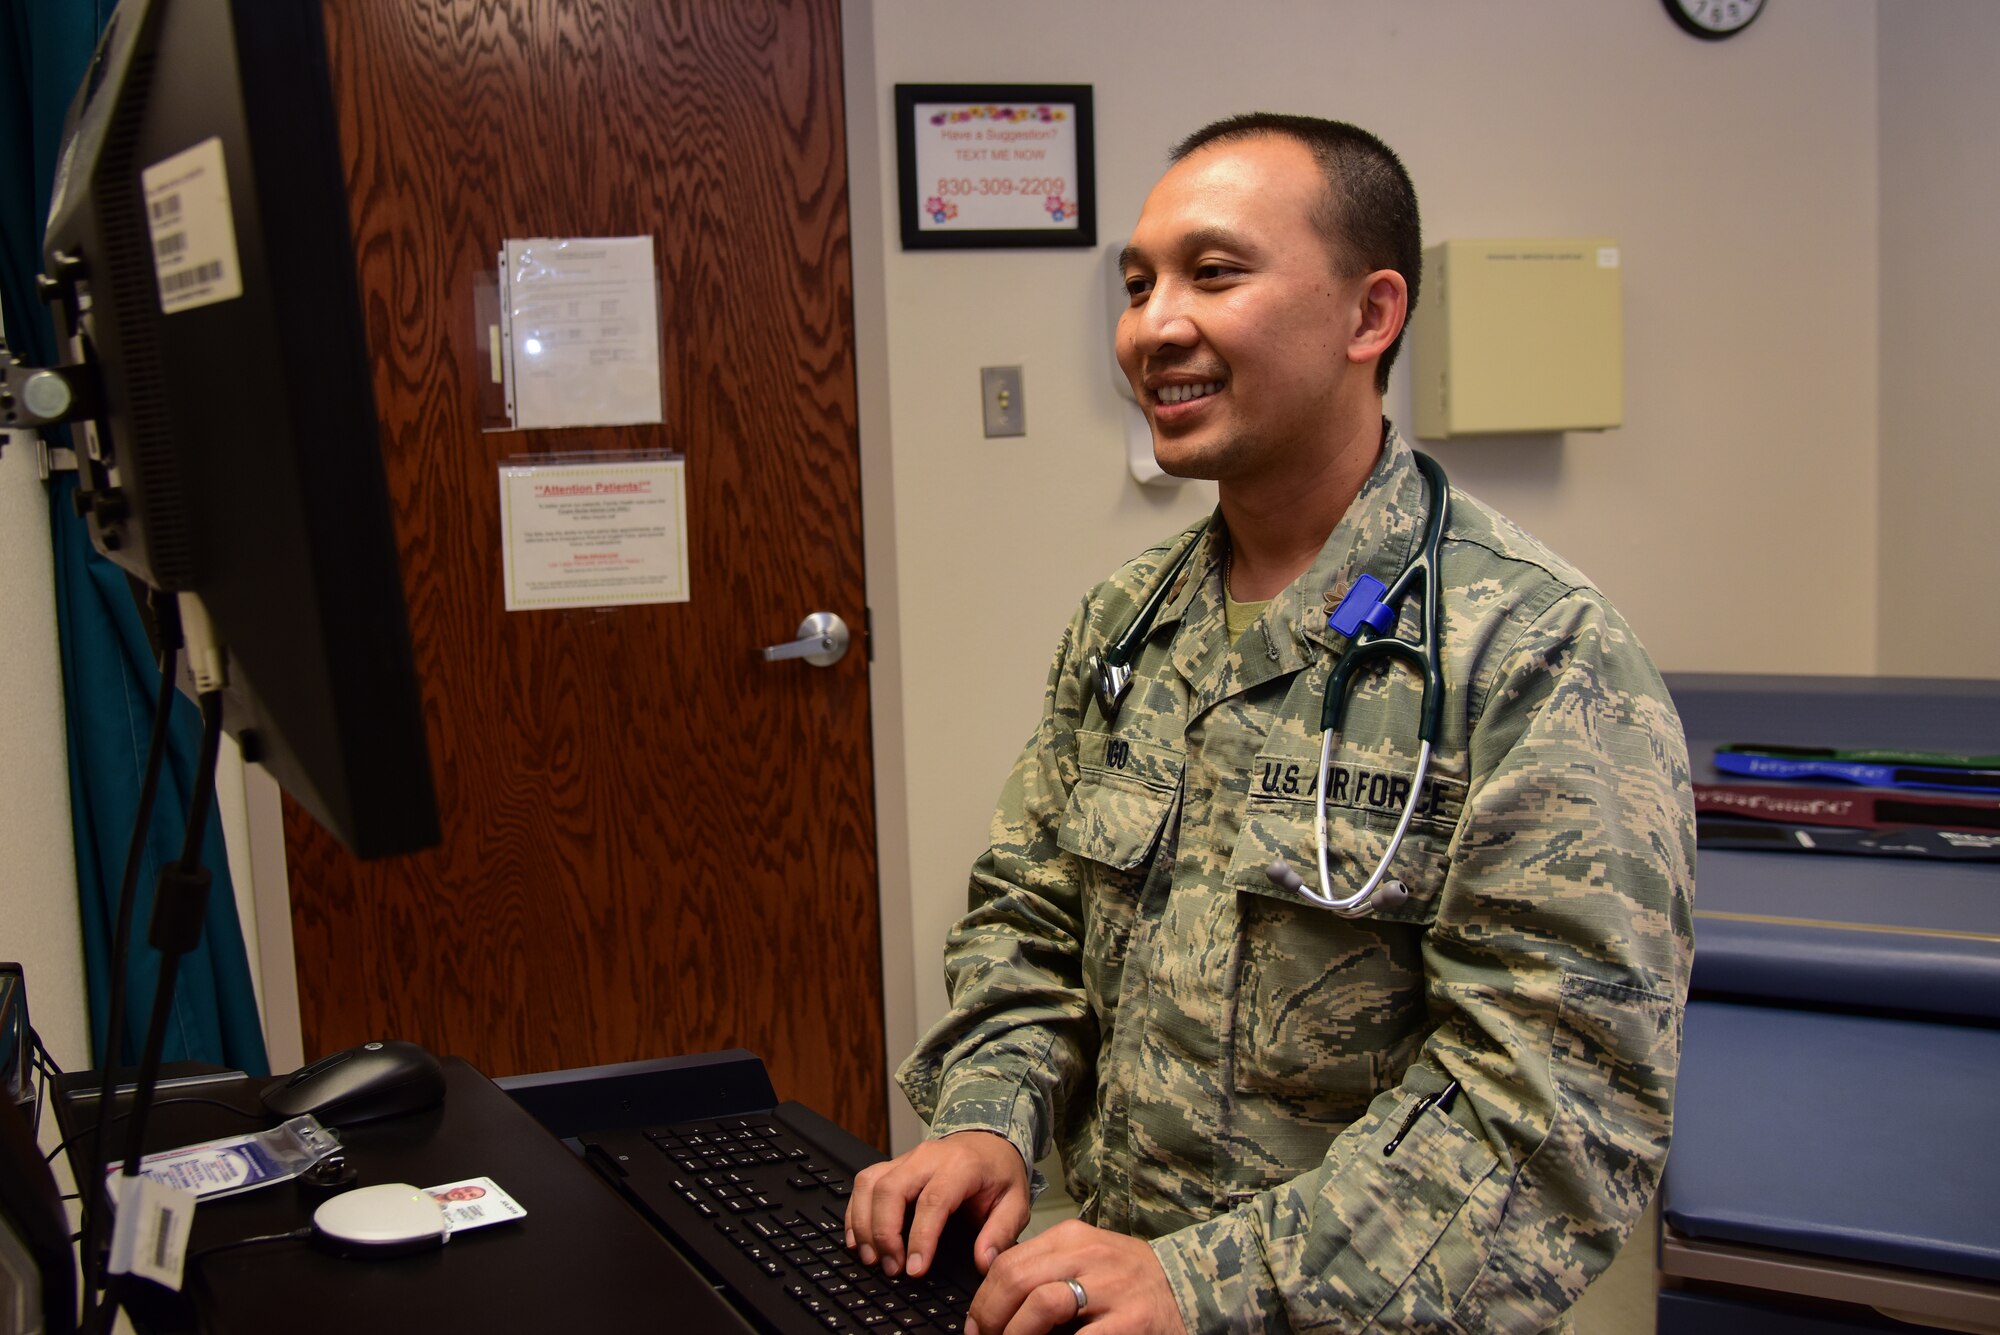 Maj. (Dr.) Phong Ngo, 47th Medical Operations Squadron physician, enters a patient’s information into a medical records program, Sept. 18, 2018, at Laughlin Air Force Base, Texas. “The challenging aspect is finding the amount of time and being efficient to try to handle everything, because we’re such a small base, we have to learn to coordinate with outside providers and specialists to get the patients the care they need,” Ngo said. (U.S. Air Force photo by Airman 1st Class Marco A. Gomez)